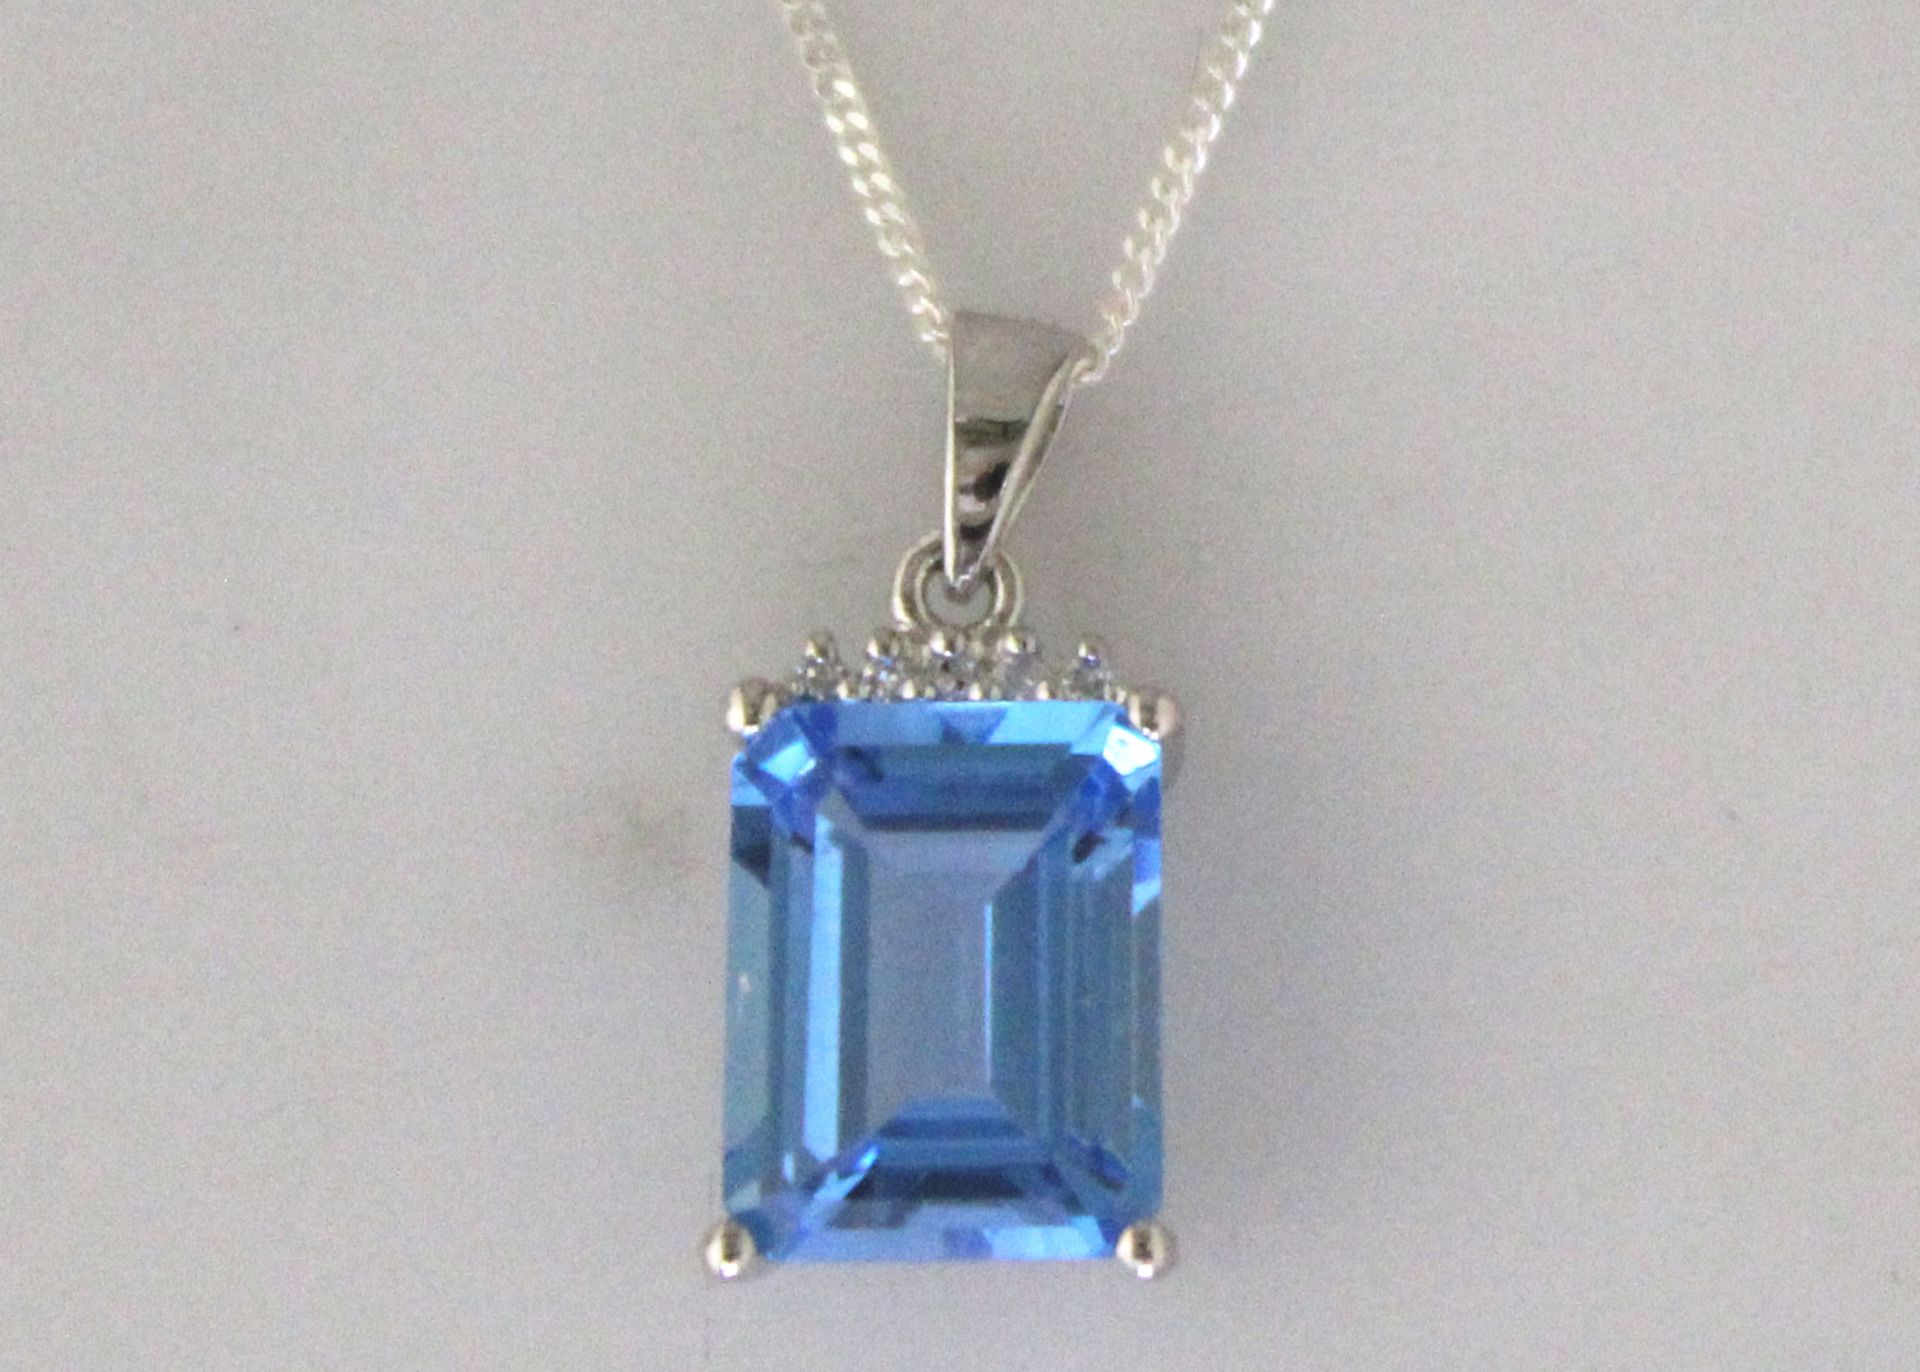 9ct White Gold Diamond And Blue Topaz Pendant (T3.76) 0.01 Carats - Image 5 of 6